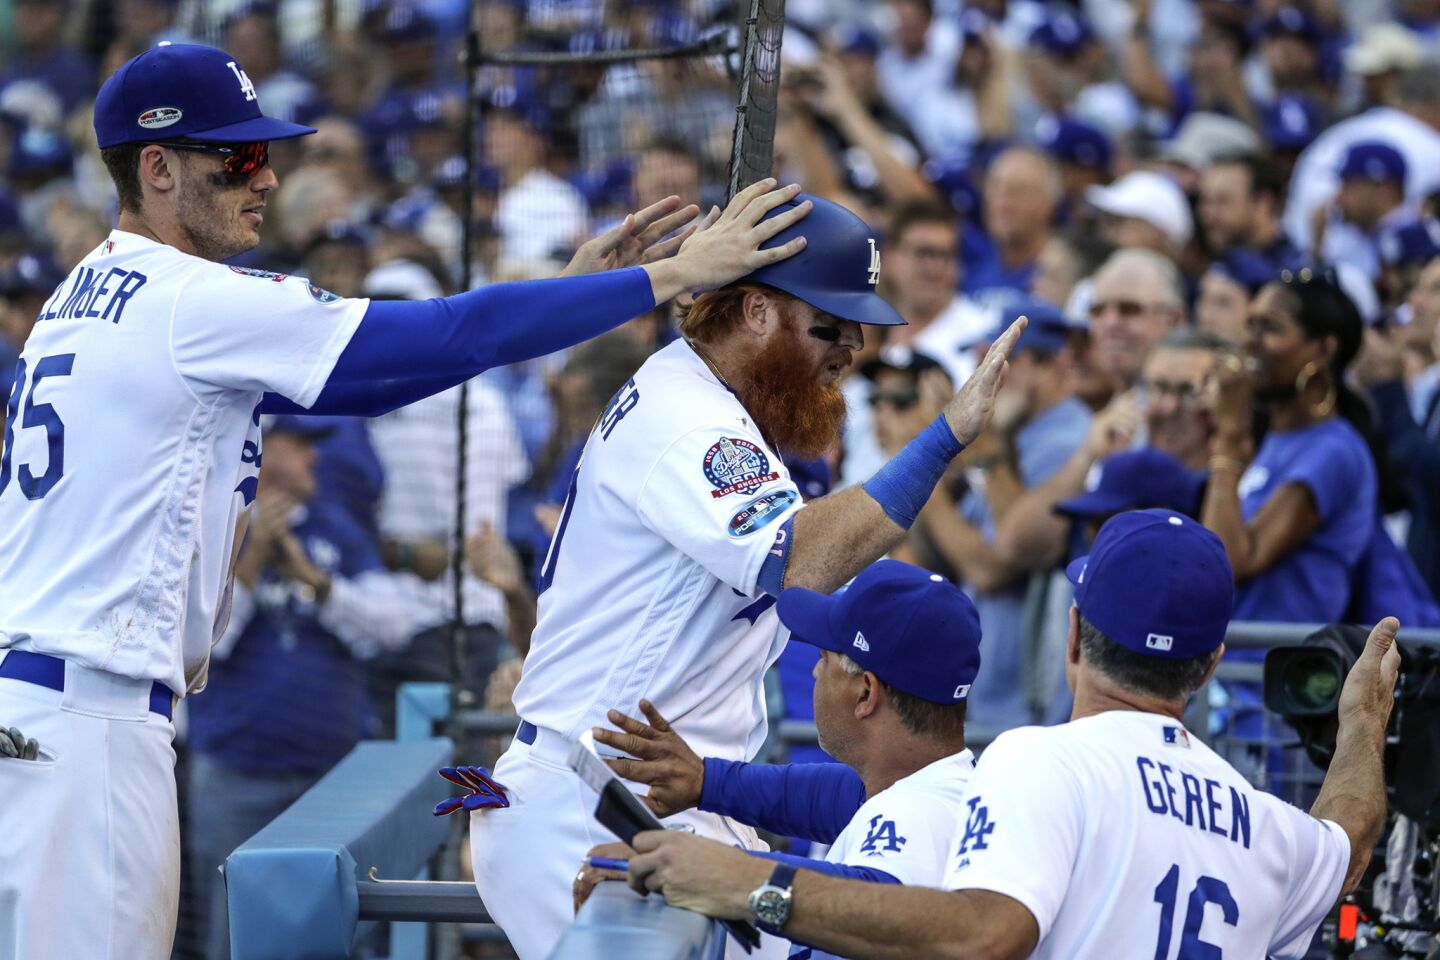 Dodgers Justin Turner is congratulated after scoring a run in the sixth inning.